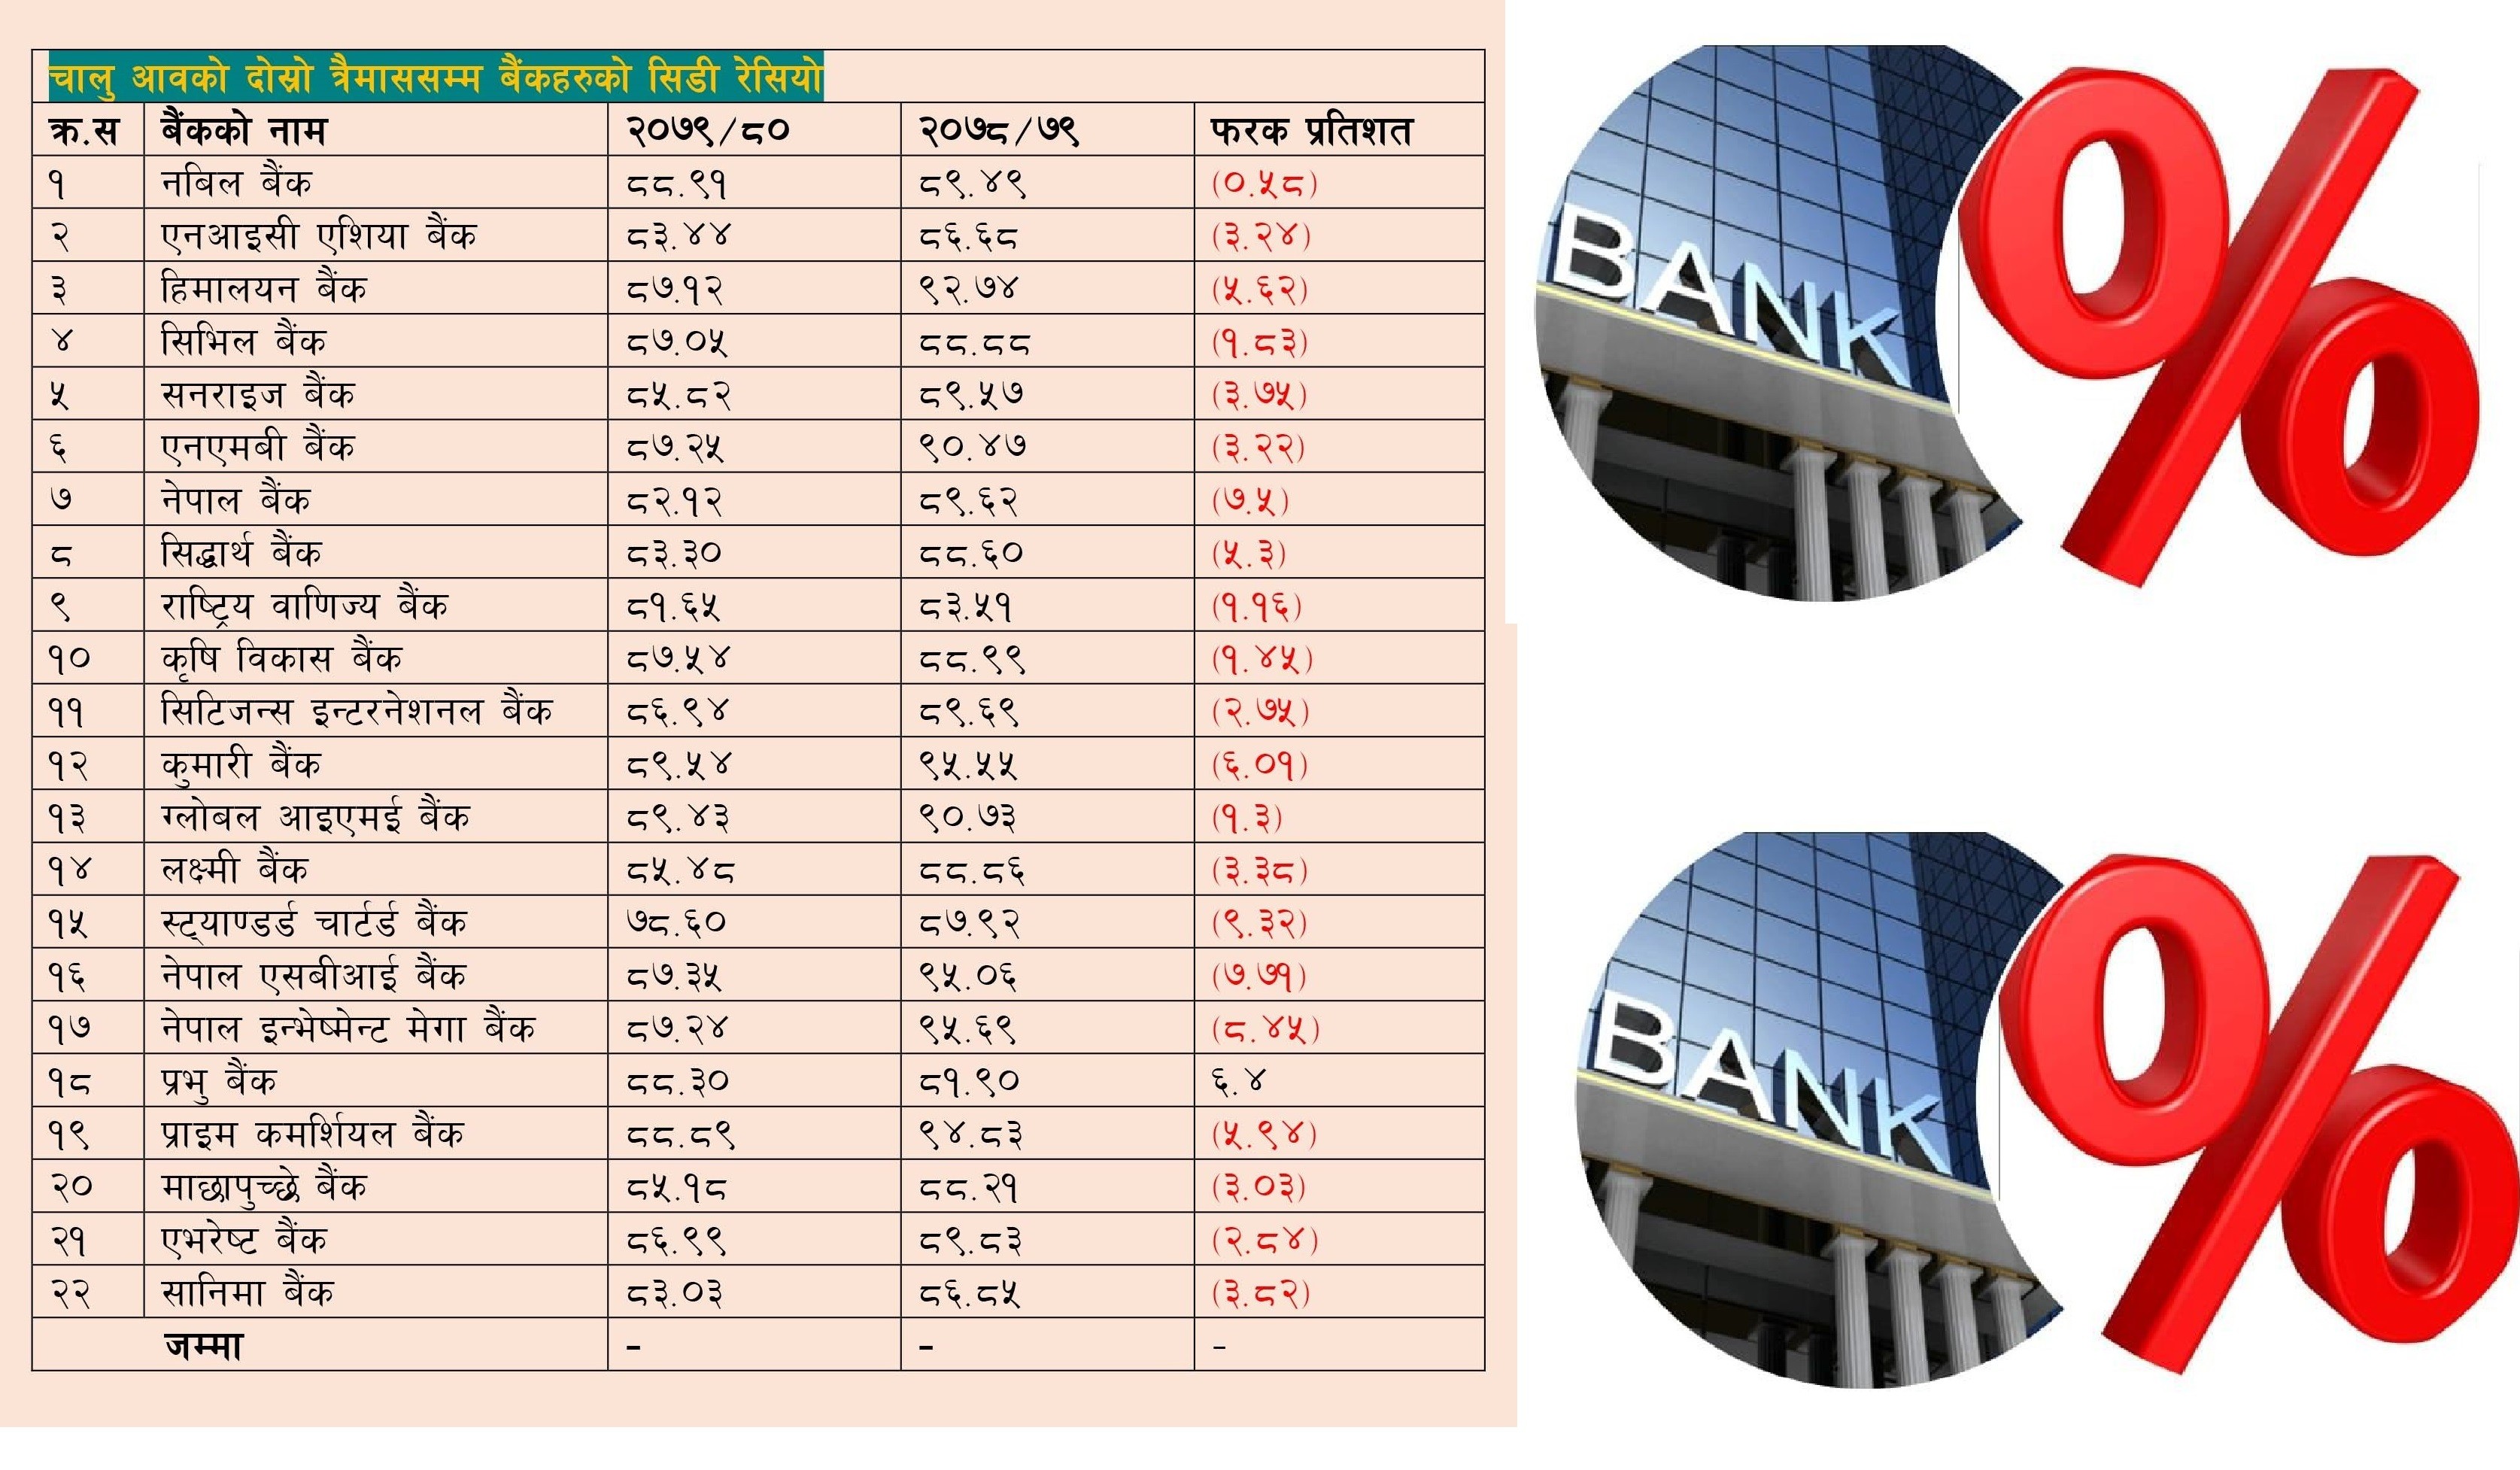 CD ratio of Commercial Banks has Declined, Now BFIs CD ratio is 86.54 Percent